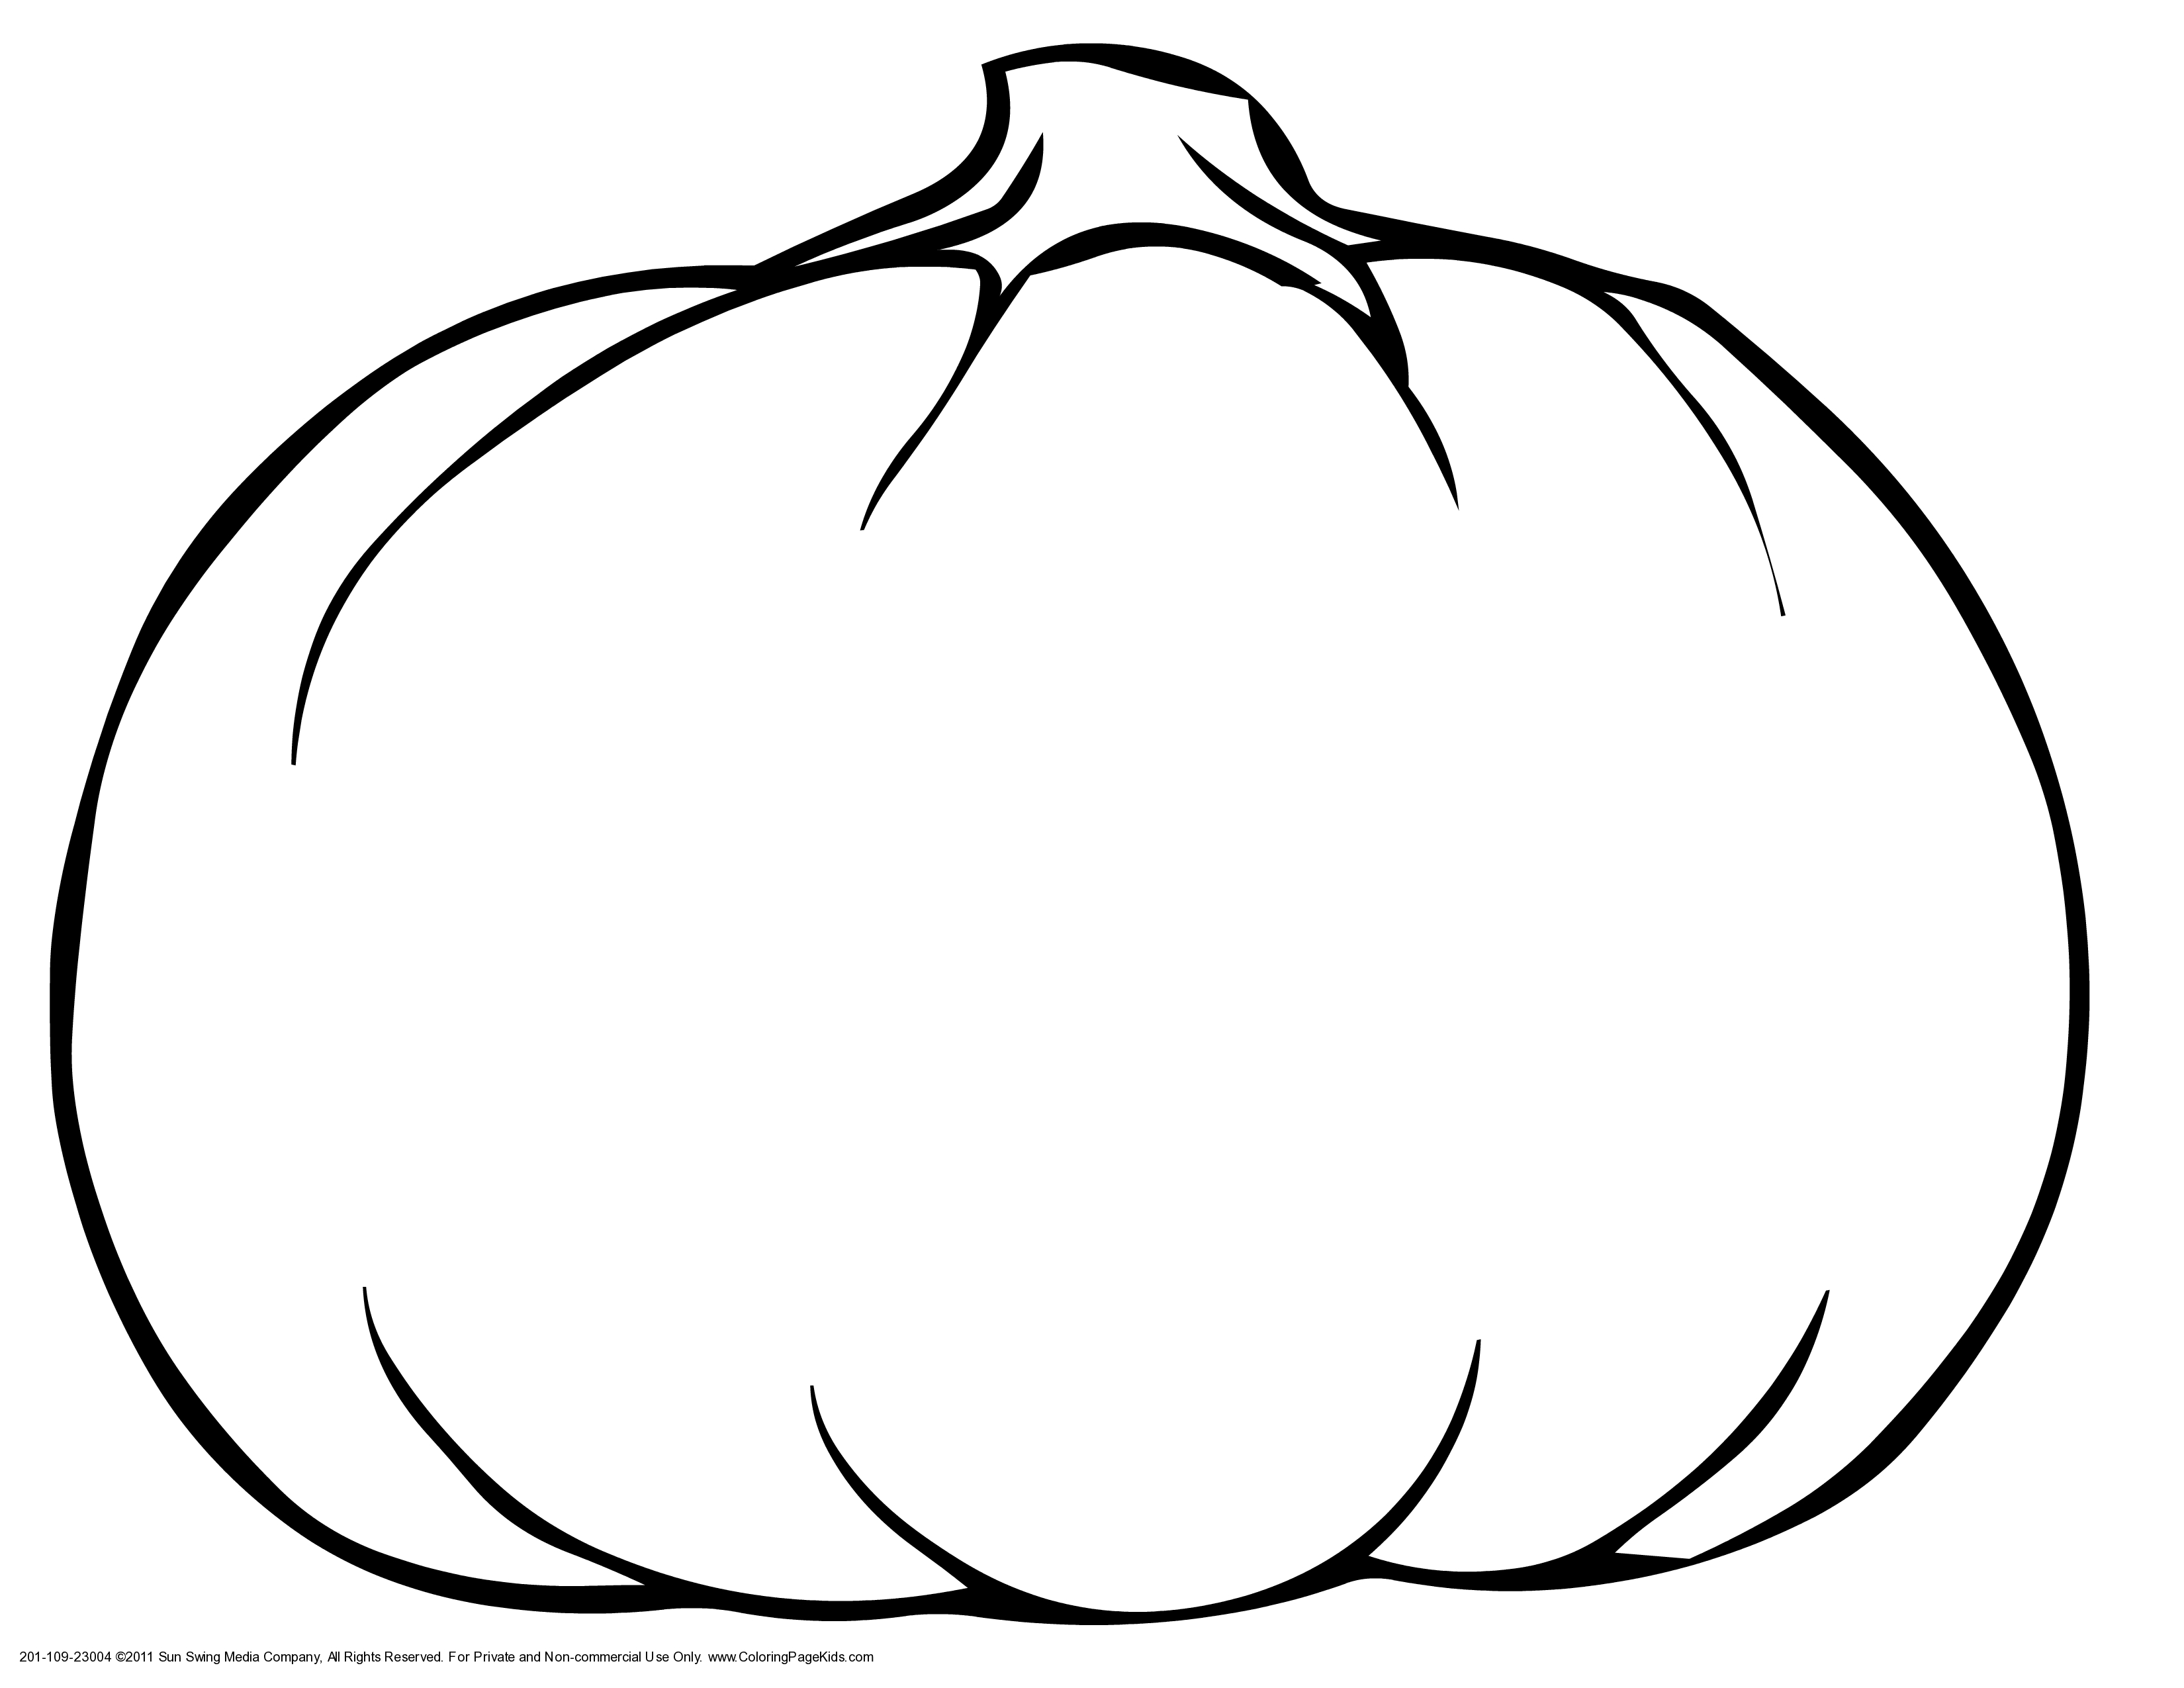 Coloring Page Of Pumpkin Pumpkin Patch Coloring Page Clipart Library Free Clipart Images